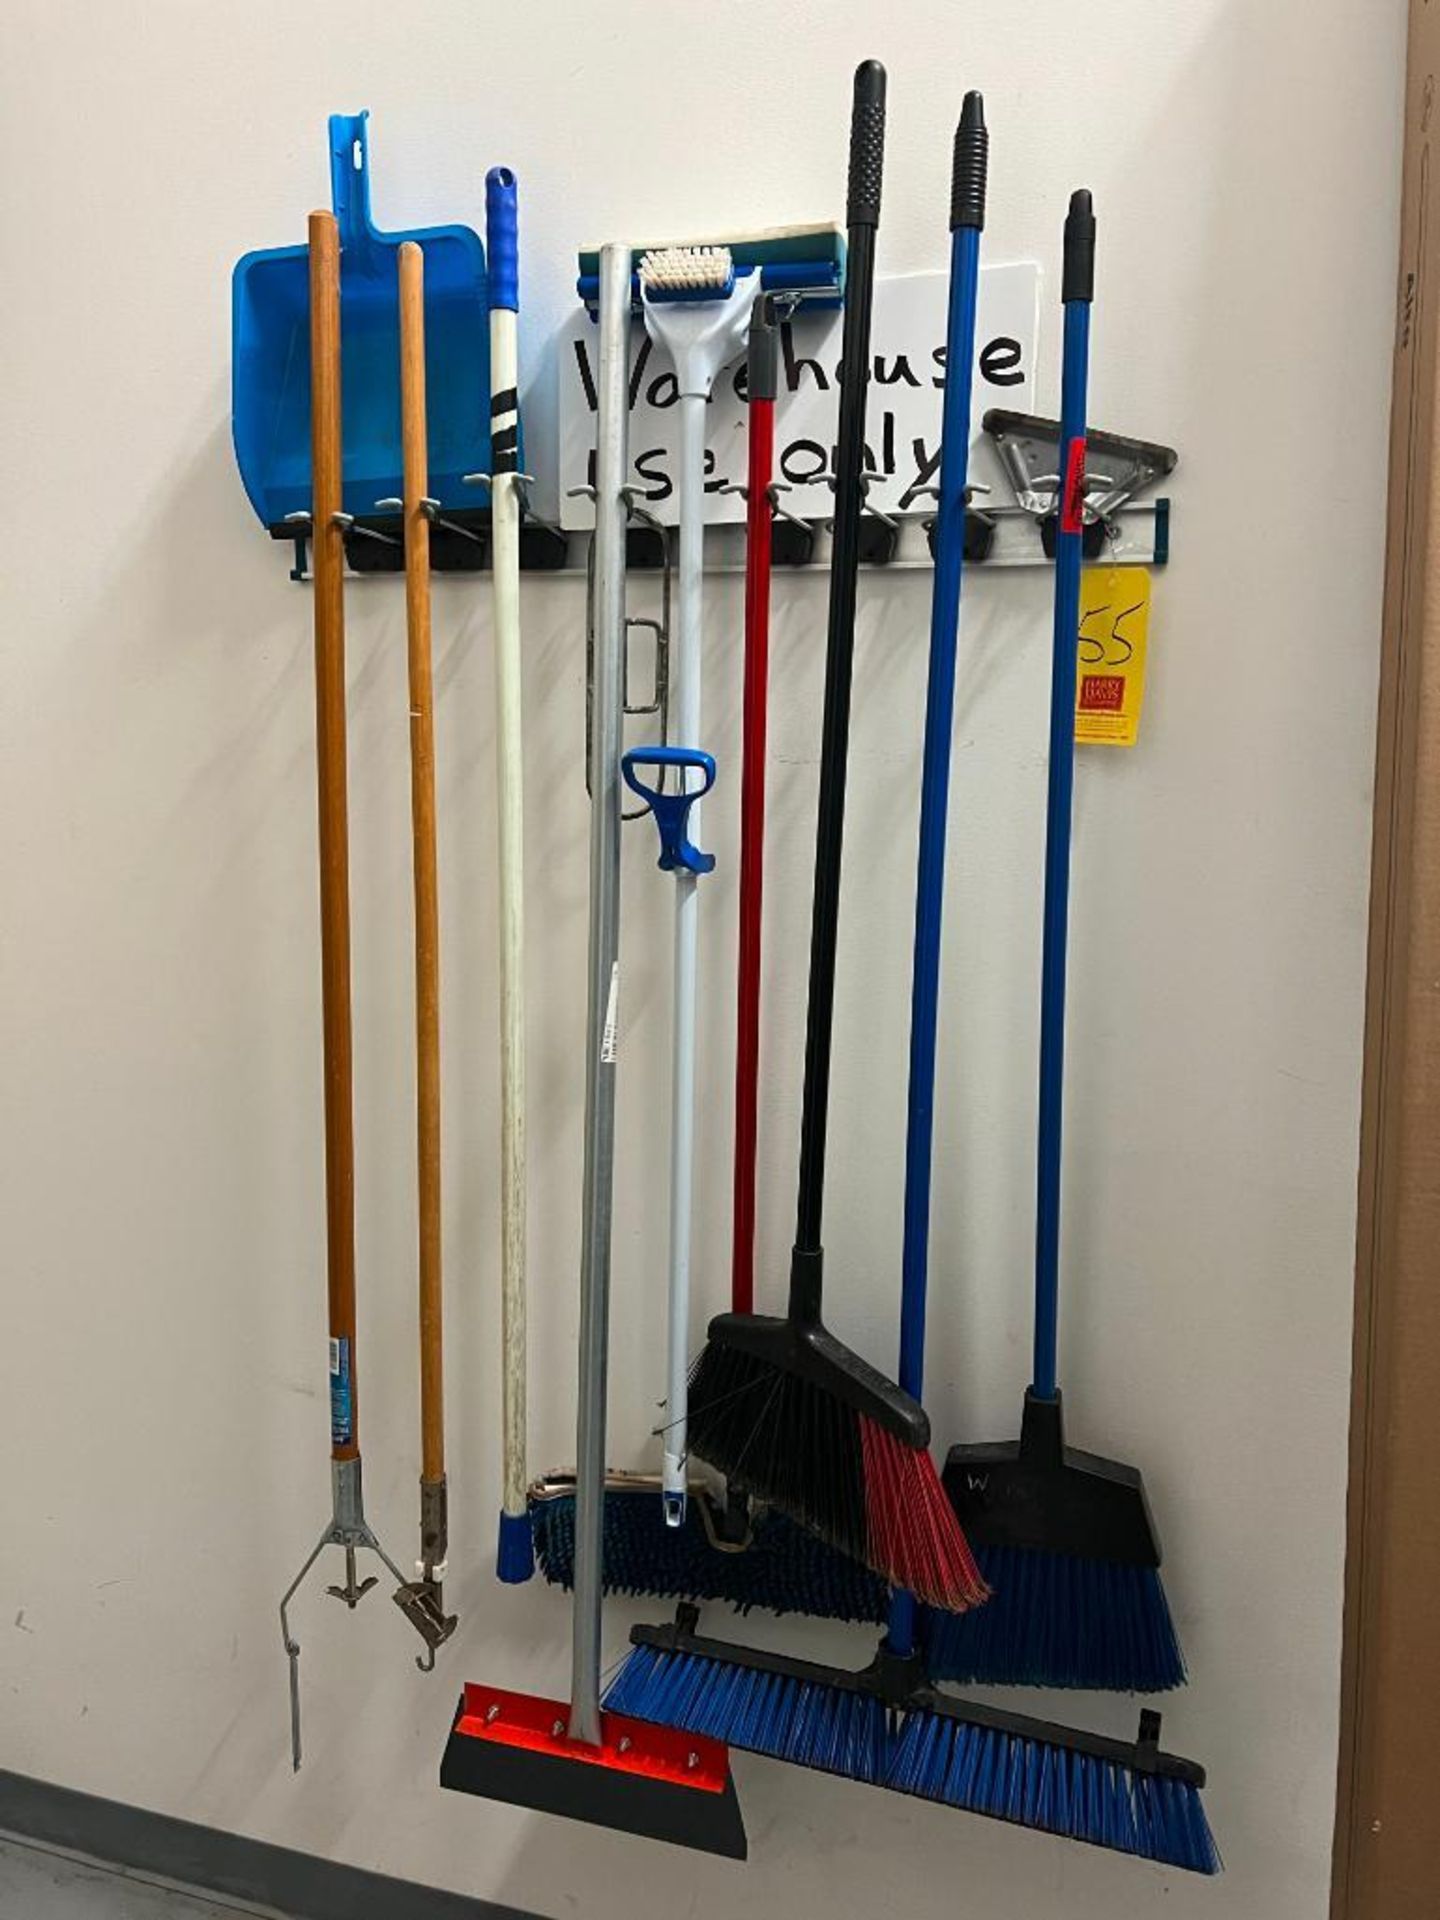 (2) Utility Racks with Assorted Brooms and Mops